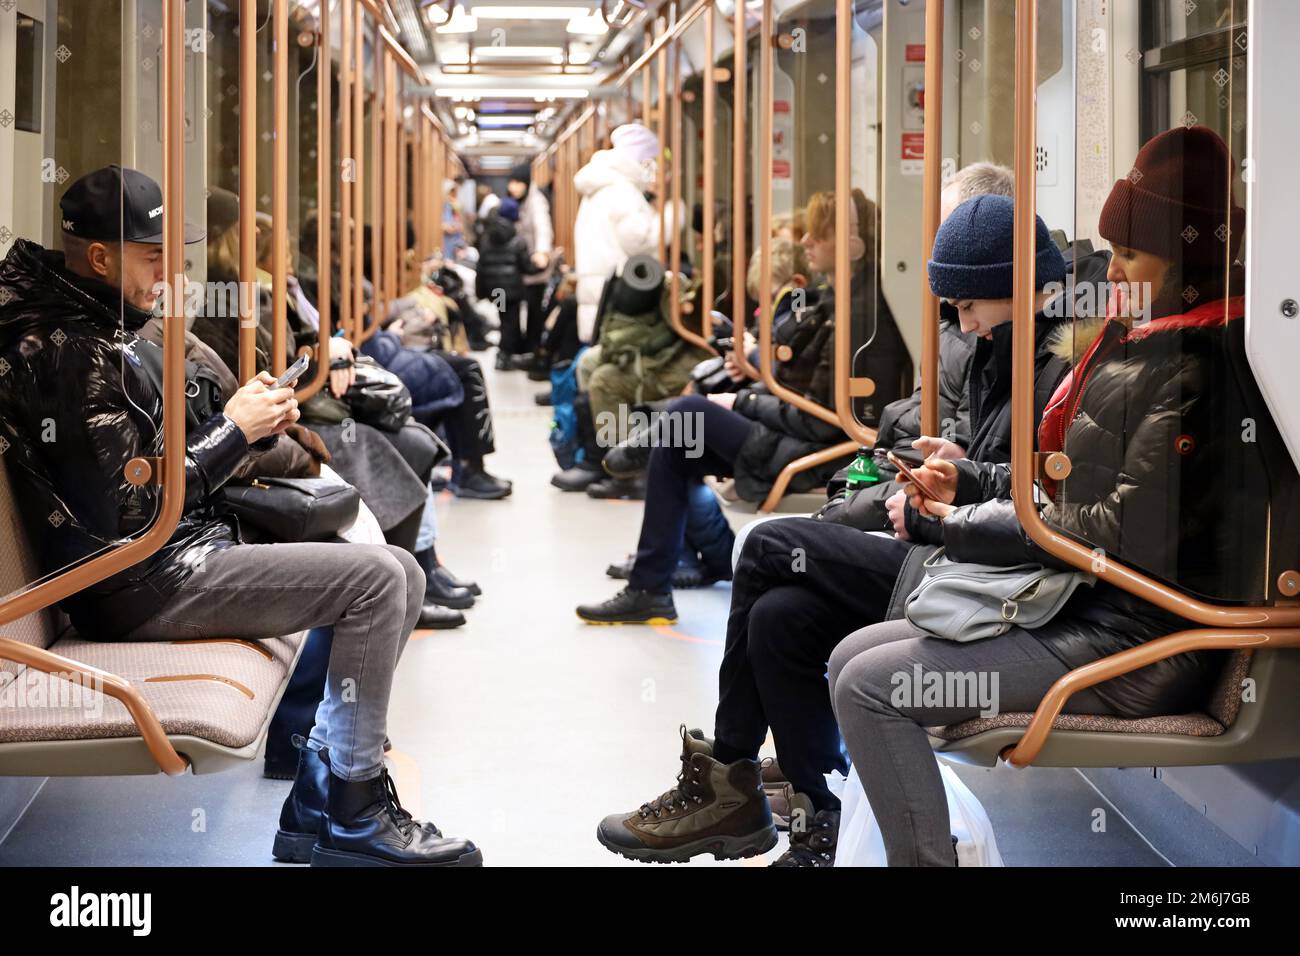 Moscow, Russia - January 2023: People in a metro train in winter, passengers sits with smartphones. Interior of modern subway car Stock Photo